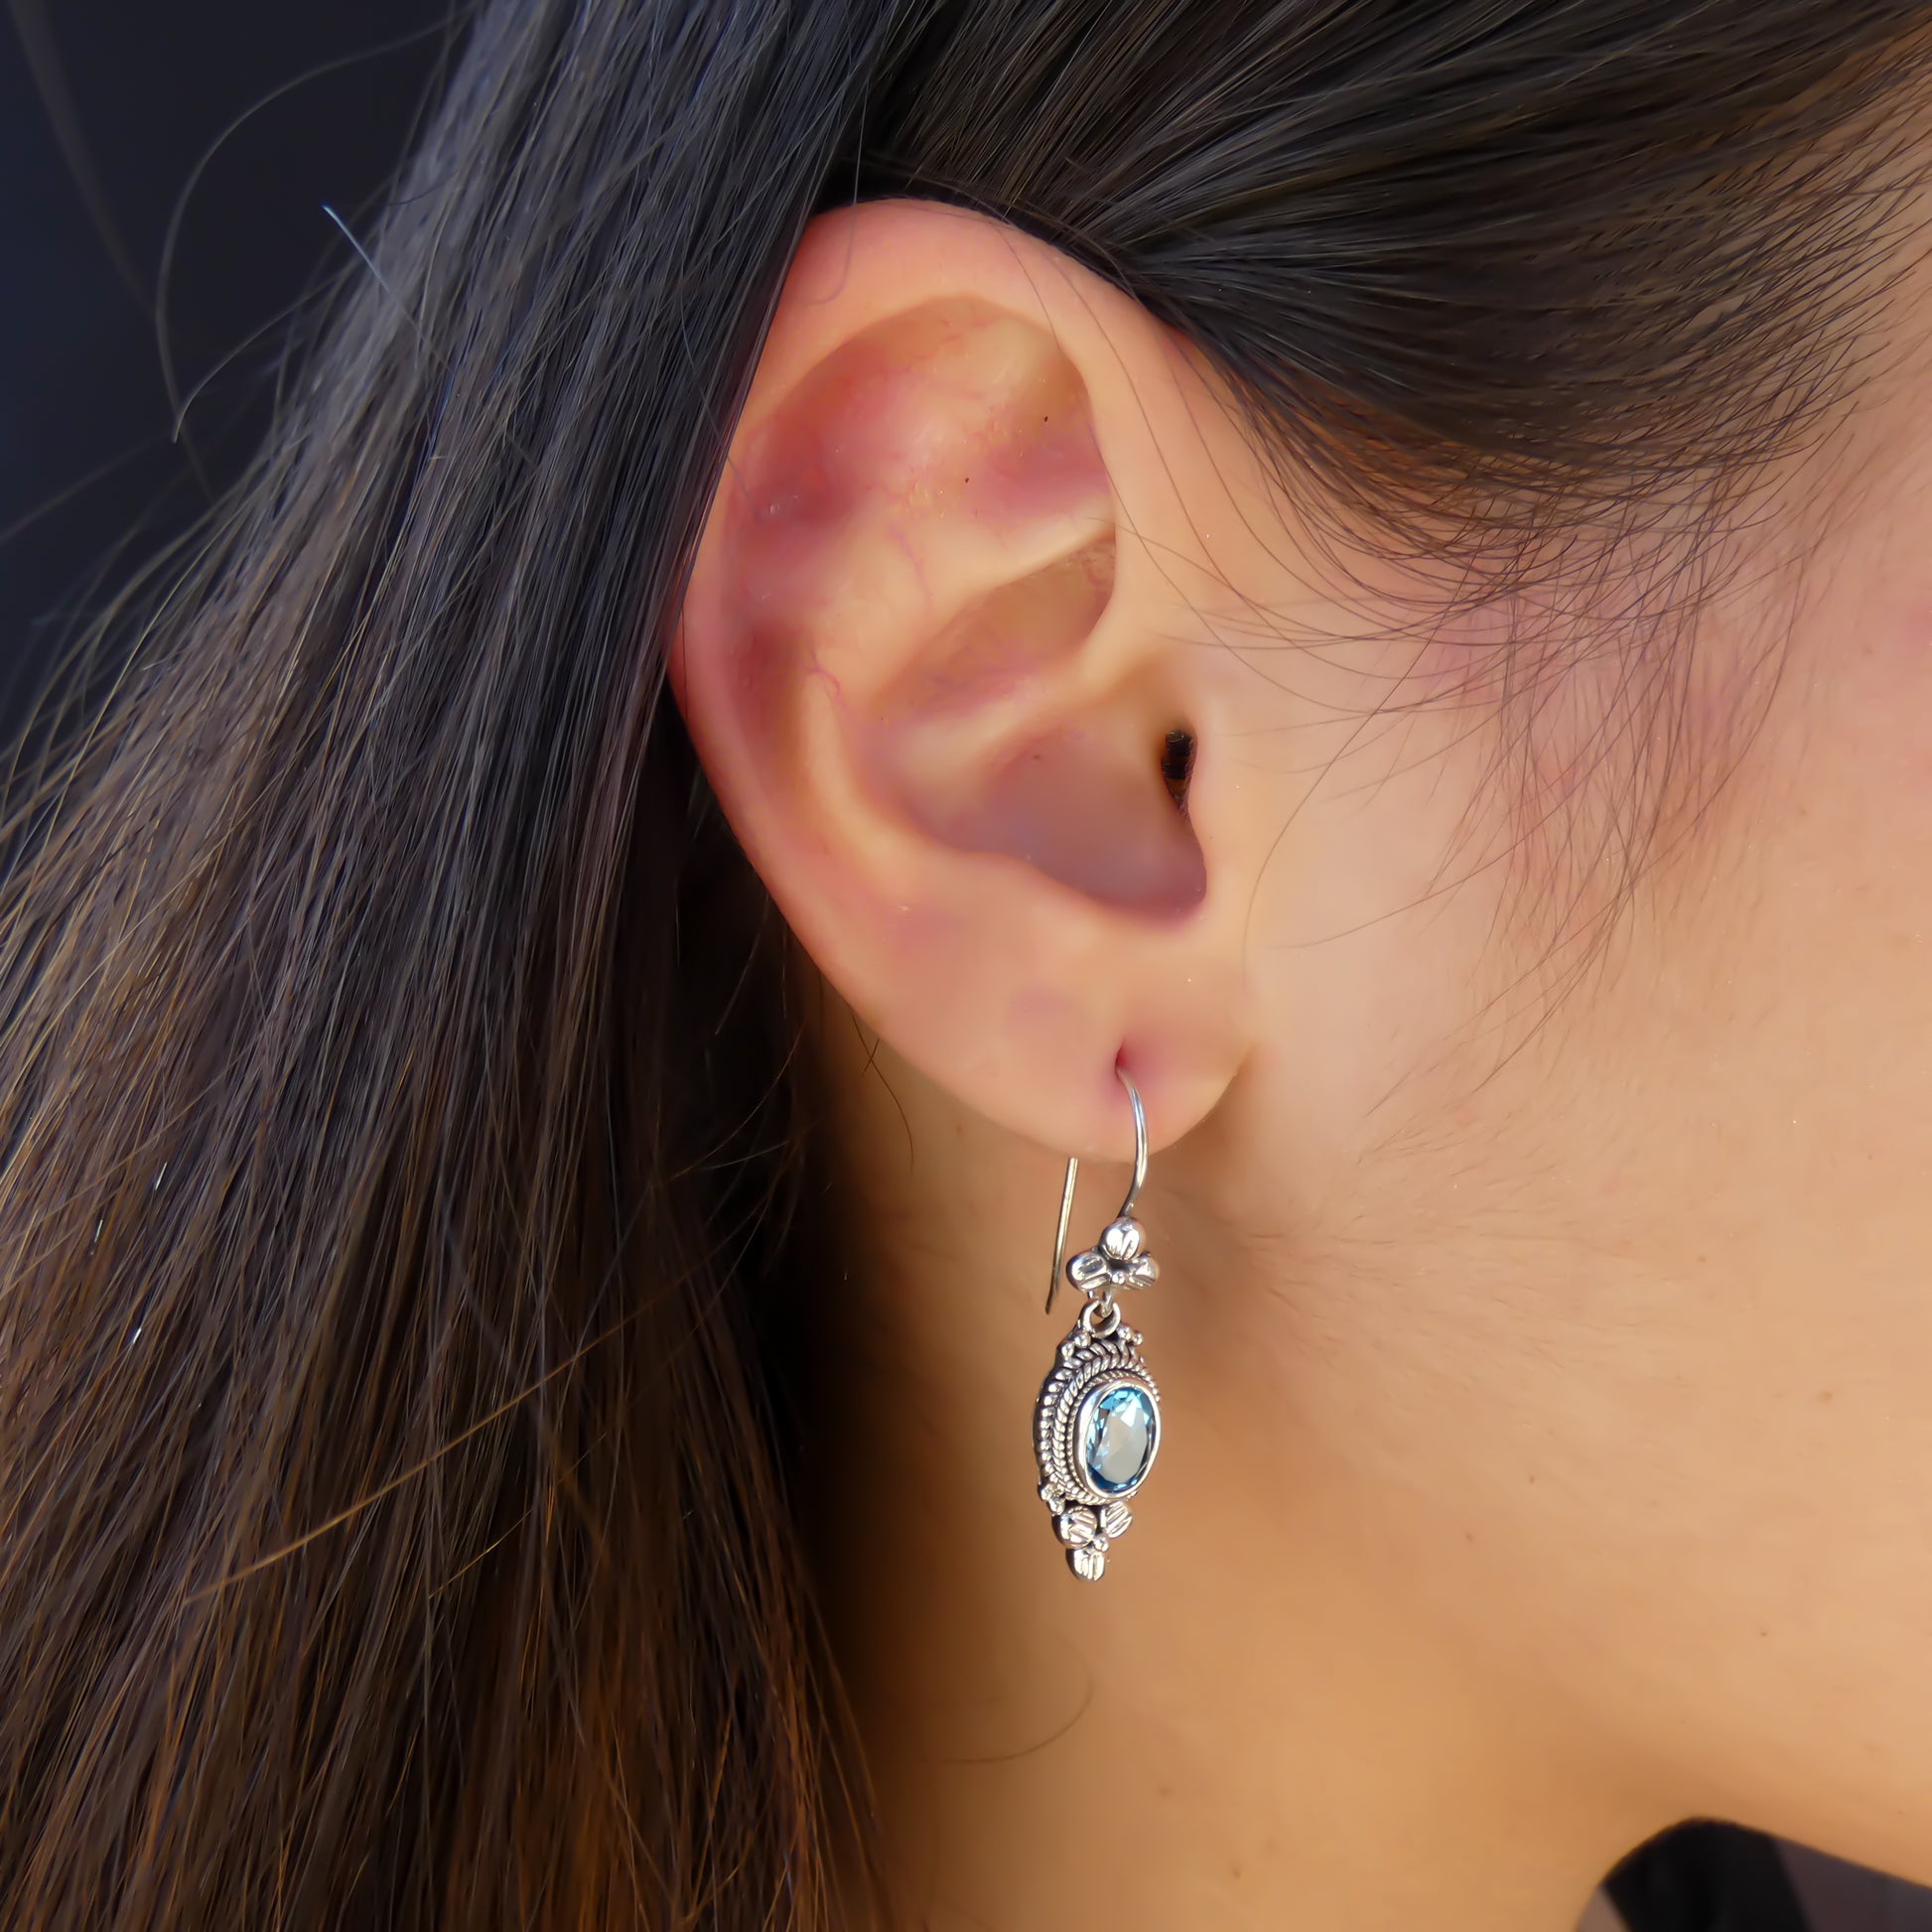 Woman wearing silver floral earrings with blue topaz stones.